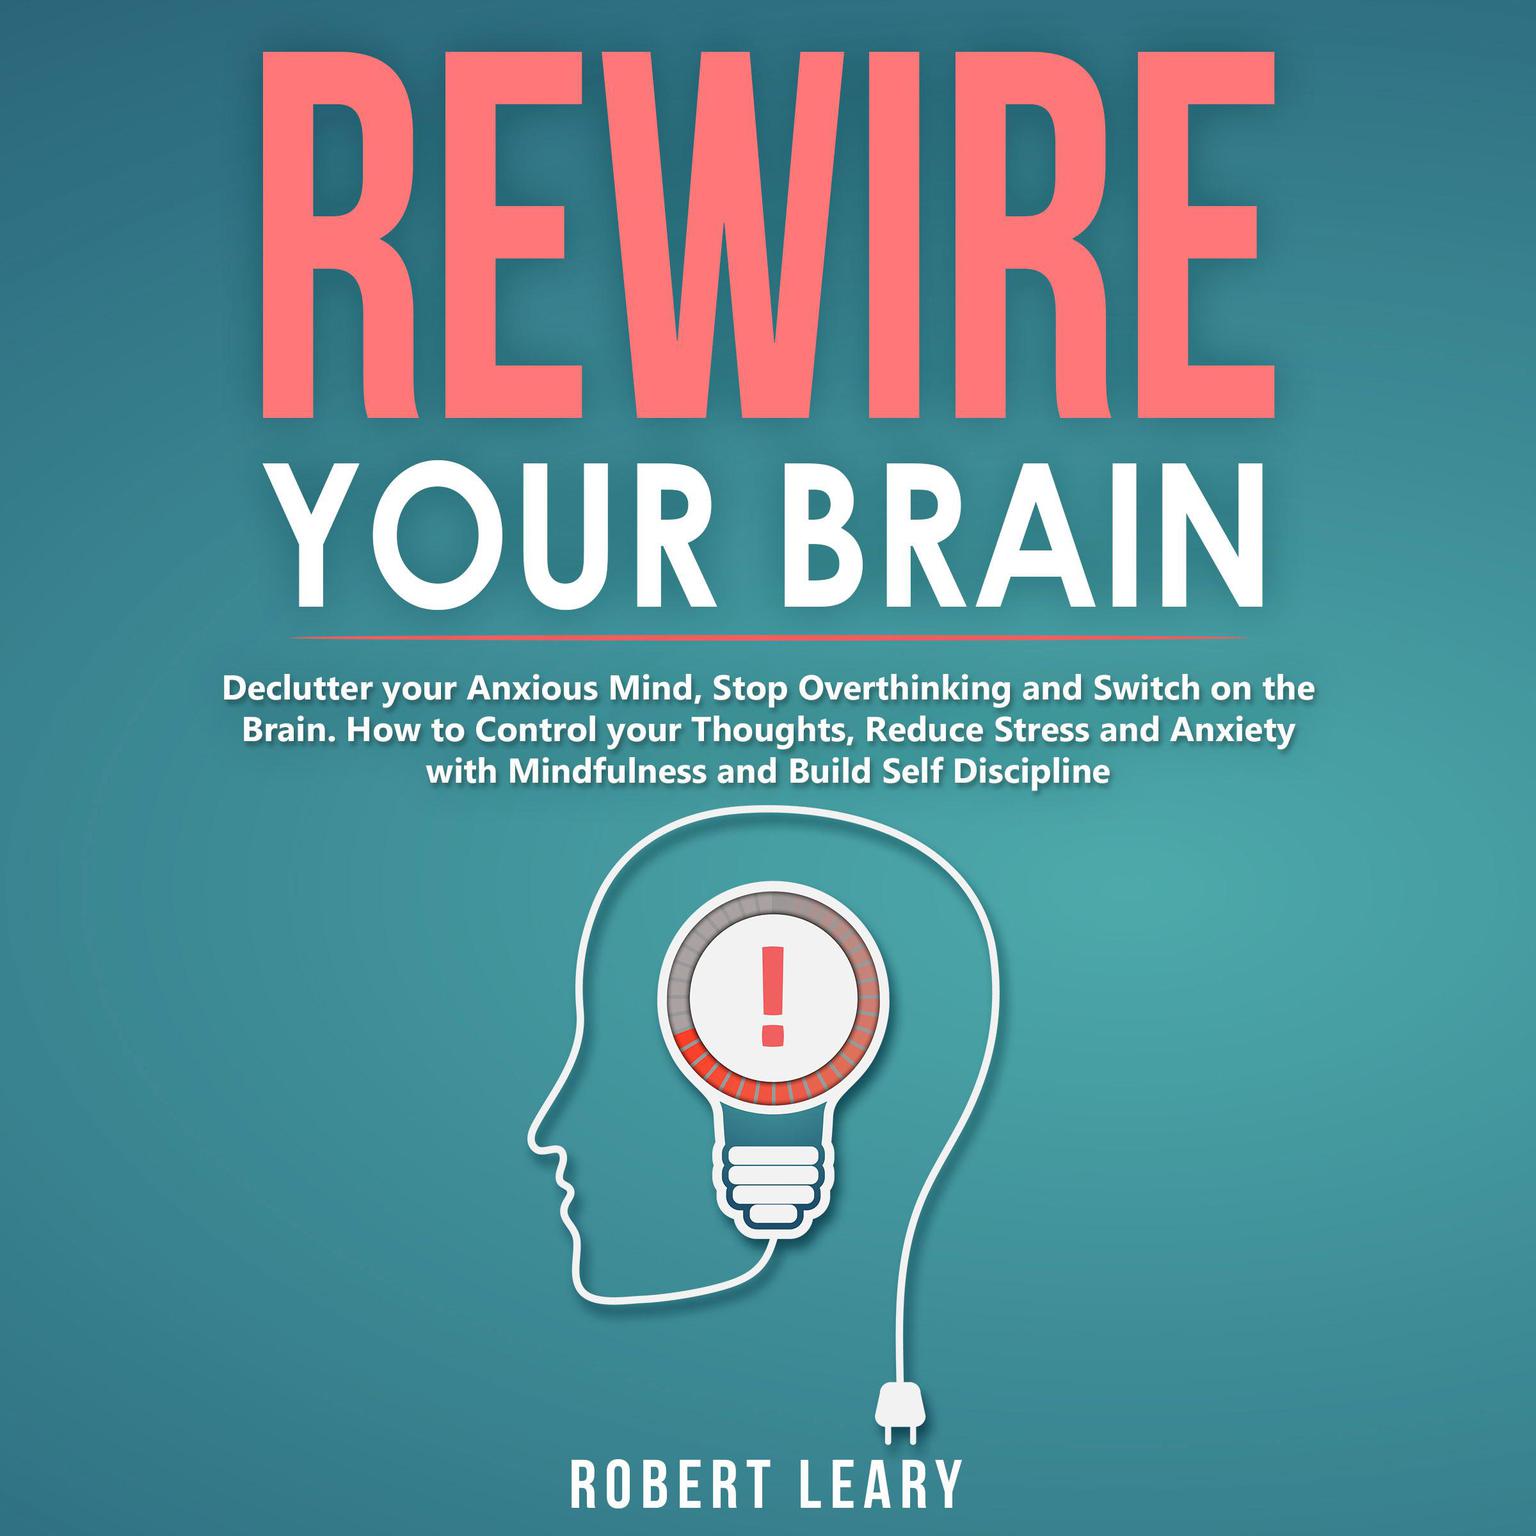 Rewire your Brain (Abridged) Audiobook, by Robert Leary